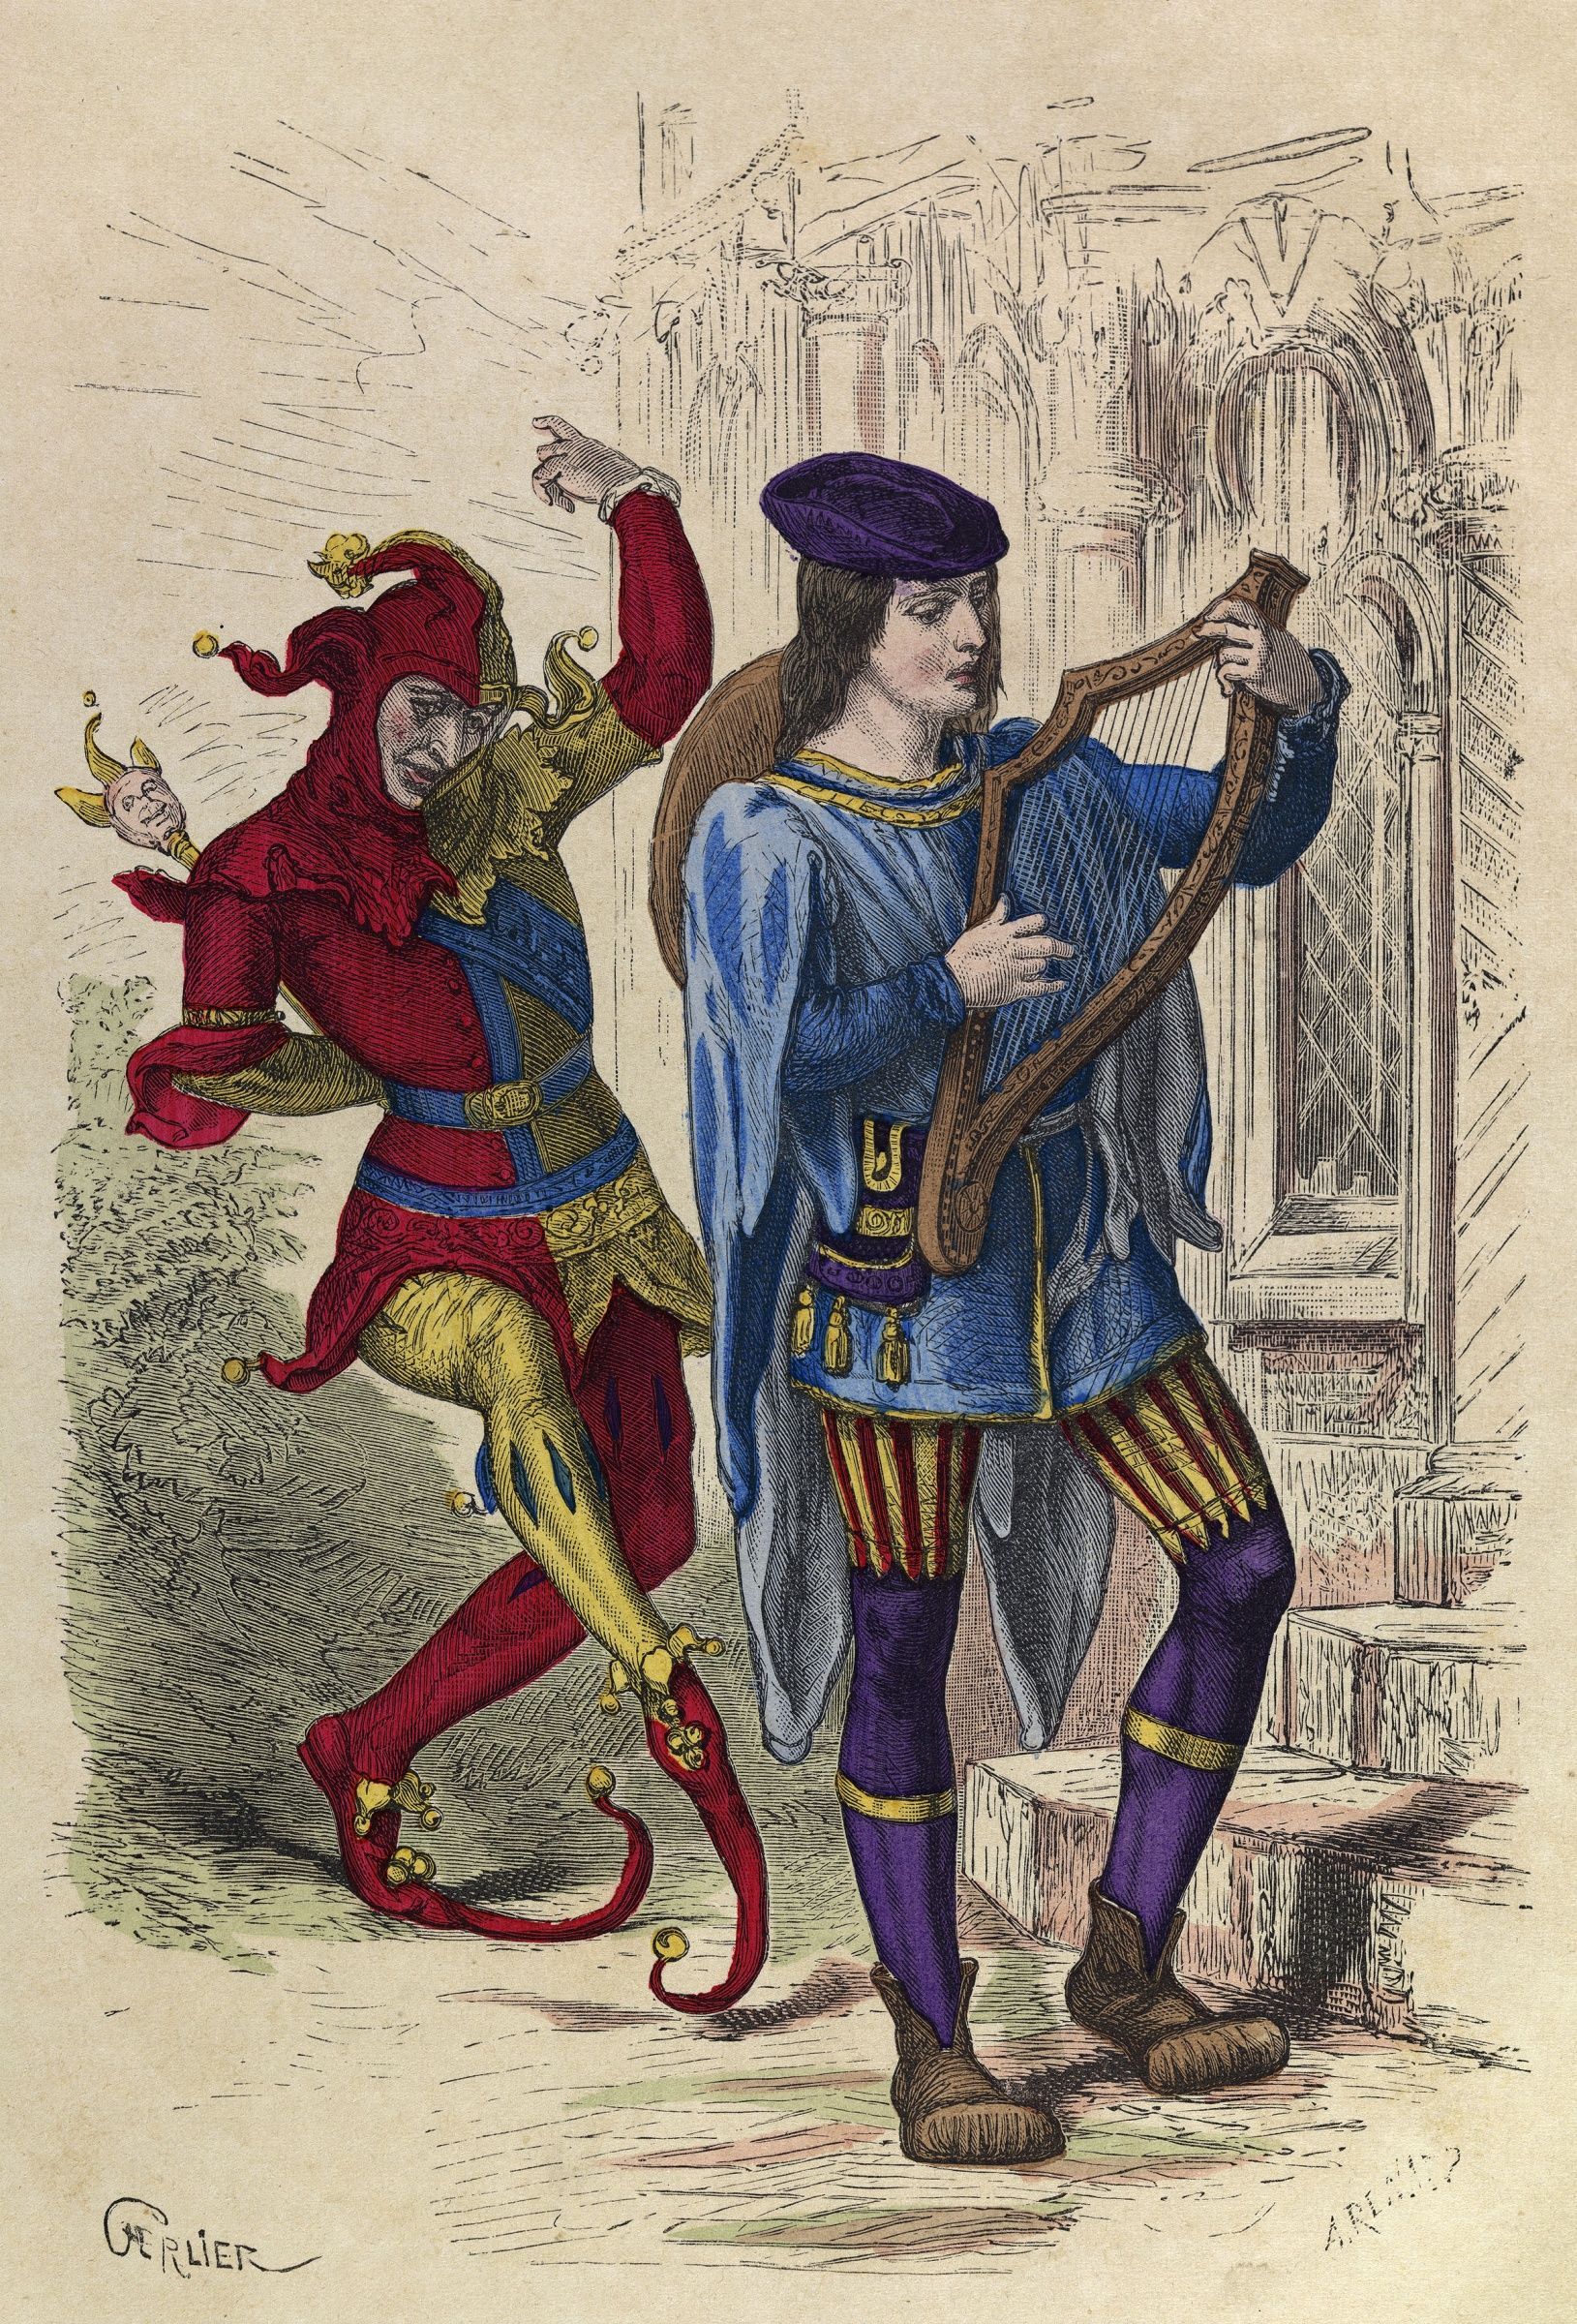 Pin by Suzy Putman on COURT JESTER | Medieval jester, Court jester, Jester